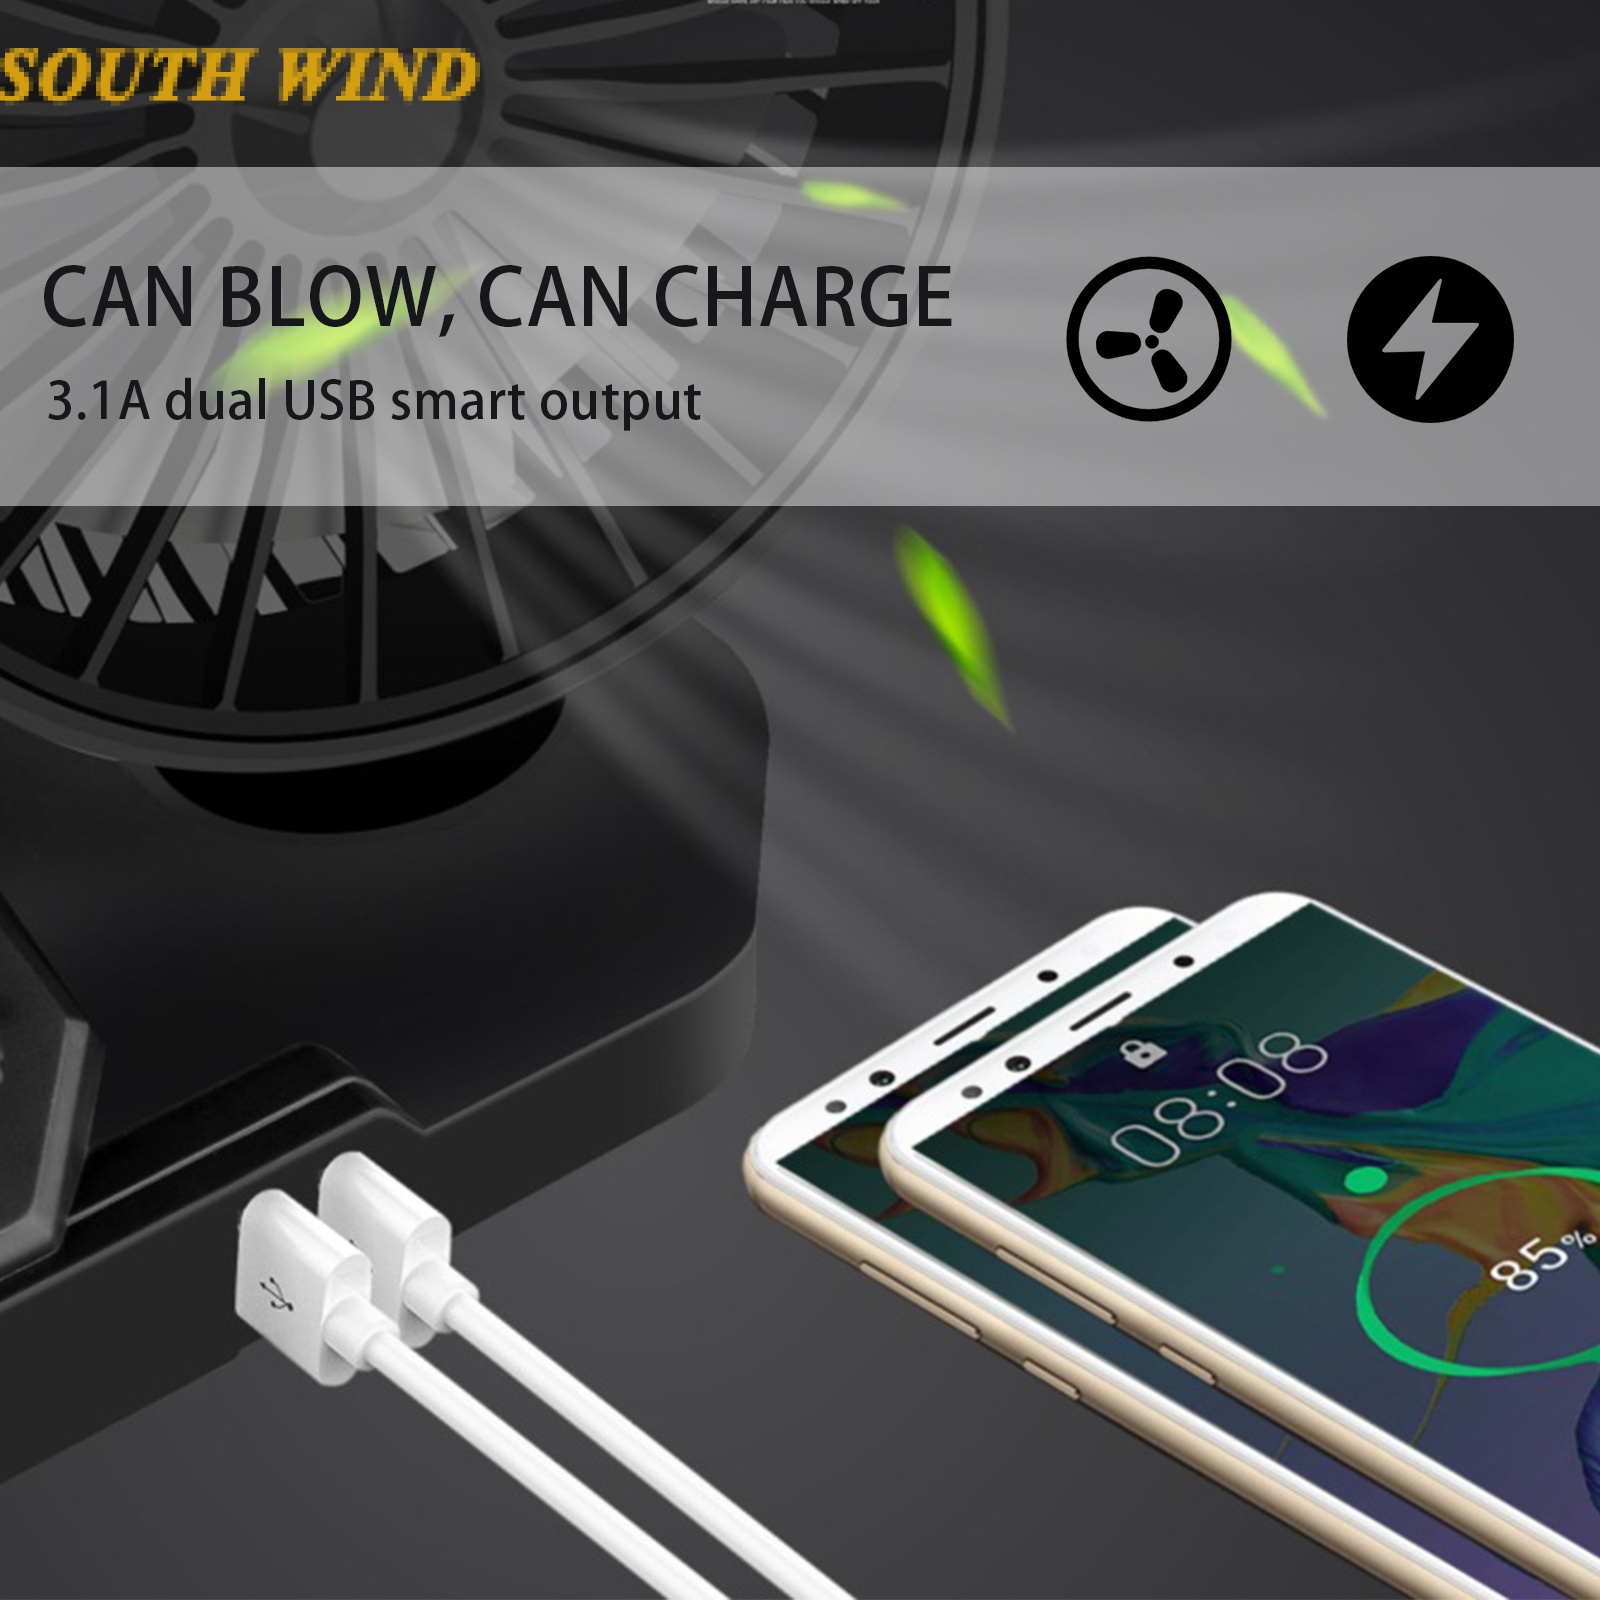 【SOUTH WIND】12V/24V Dual Head Car Fan Cooler 360 Degrees Adjustable Durable Cooler Fan Auto Air Conditioning Car Cooling Swing Fan